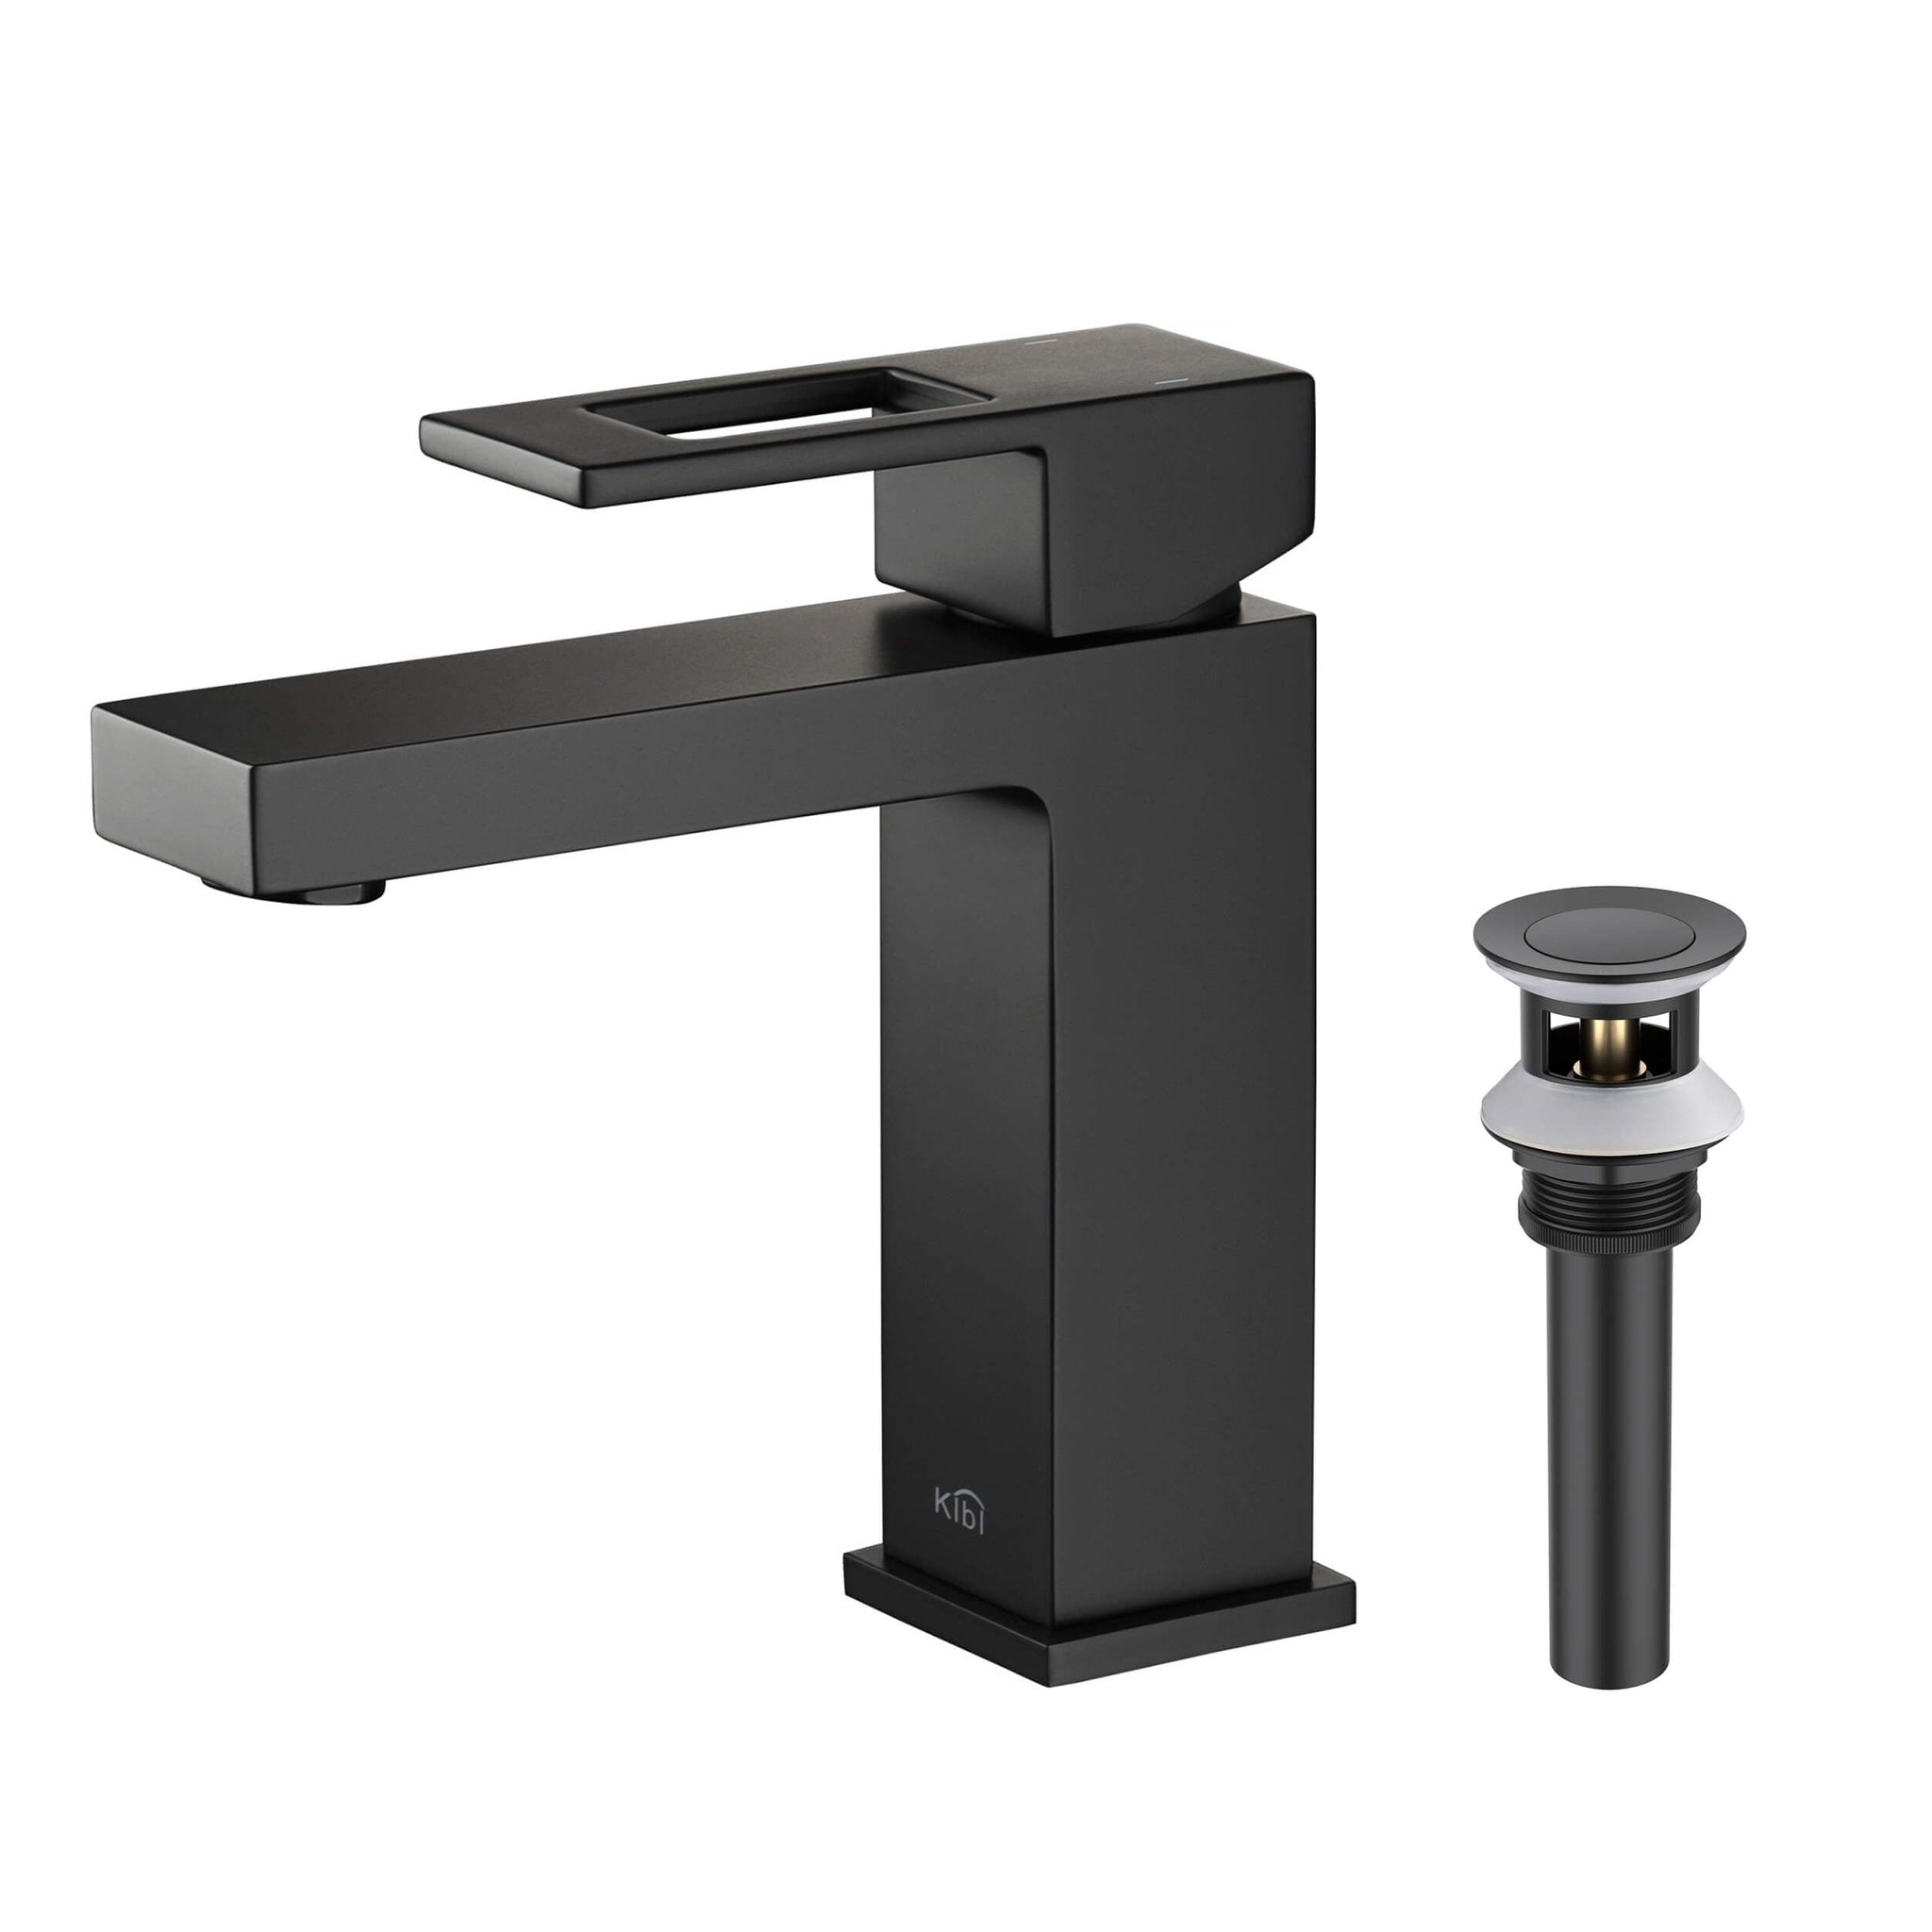 KIBI, KIBI Cubic Single Handle Matte Black Solid Brass Bathroom Vanity Sink Faucet With Pop-Up Drain Stopper Small Cover With Overflow